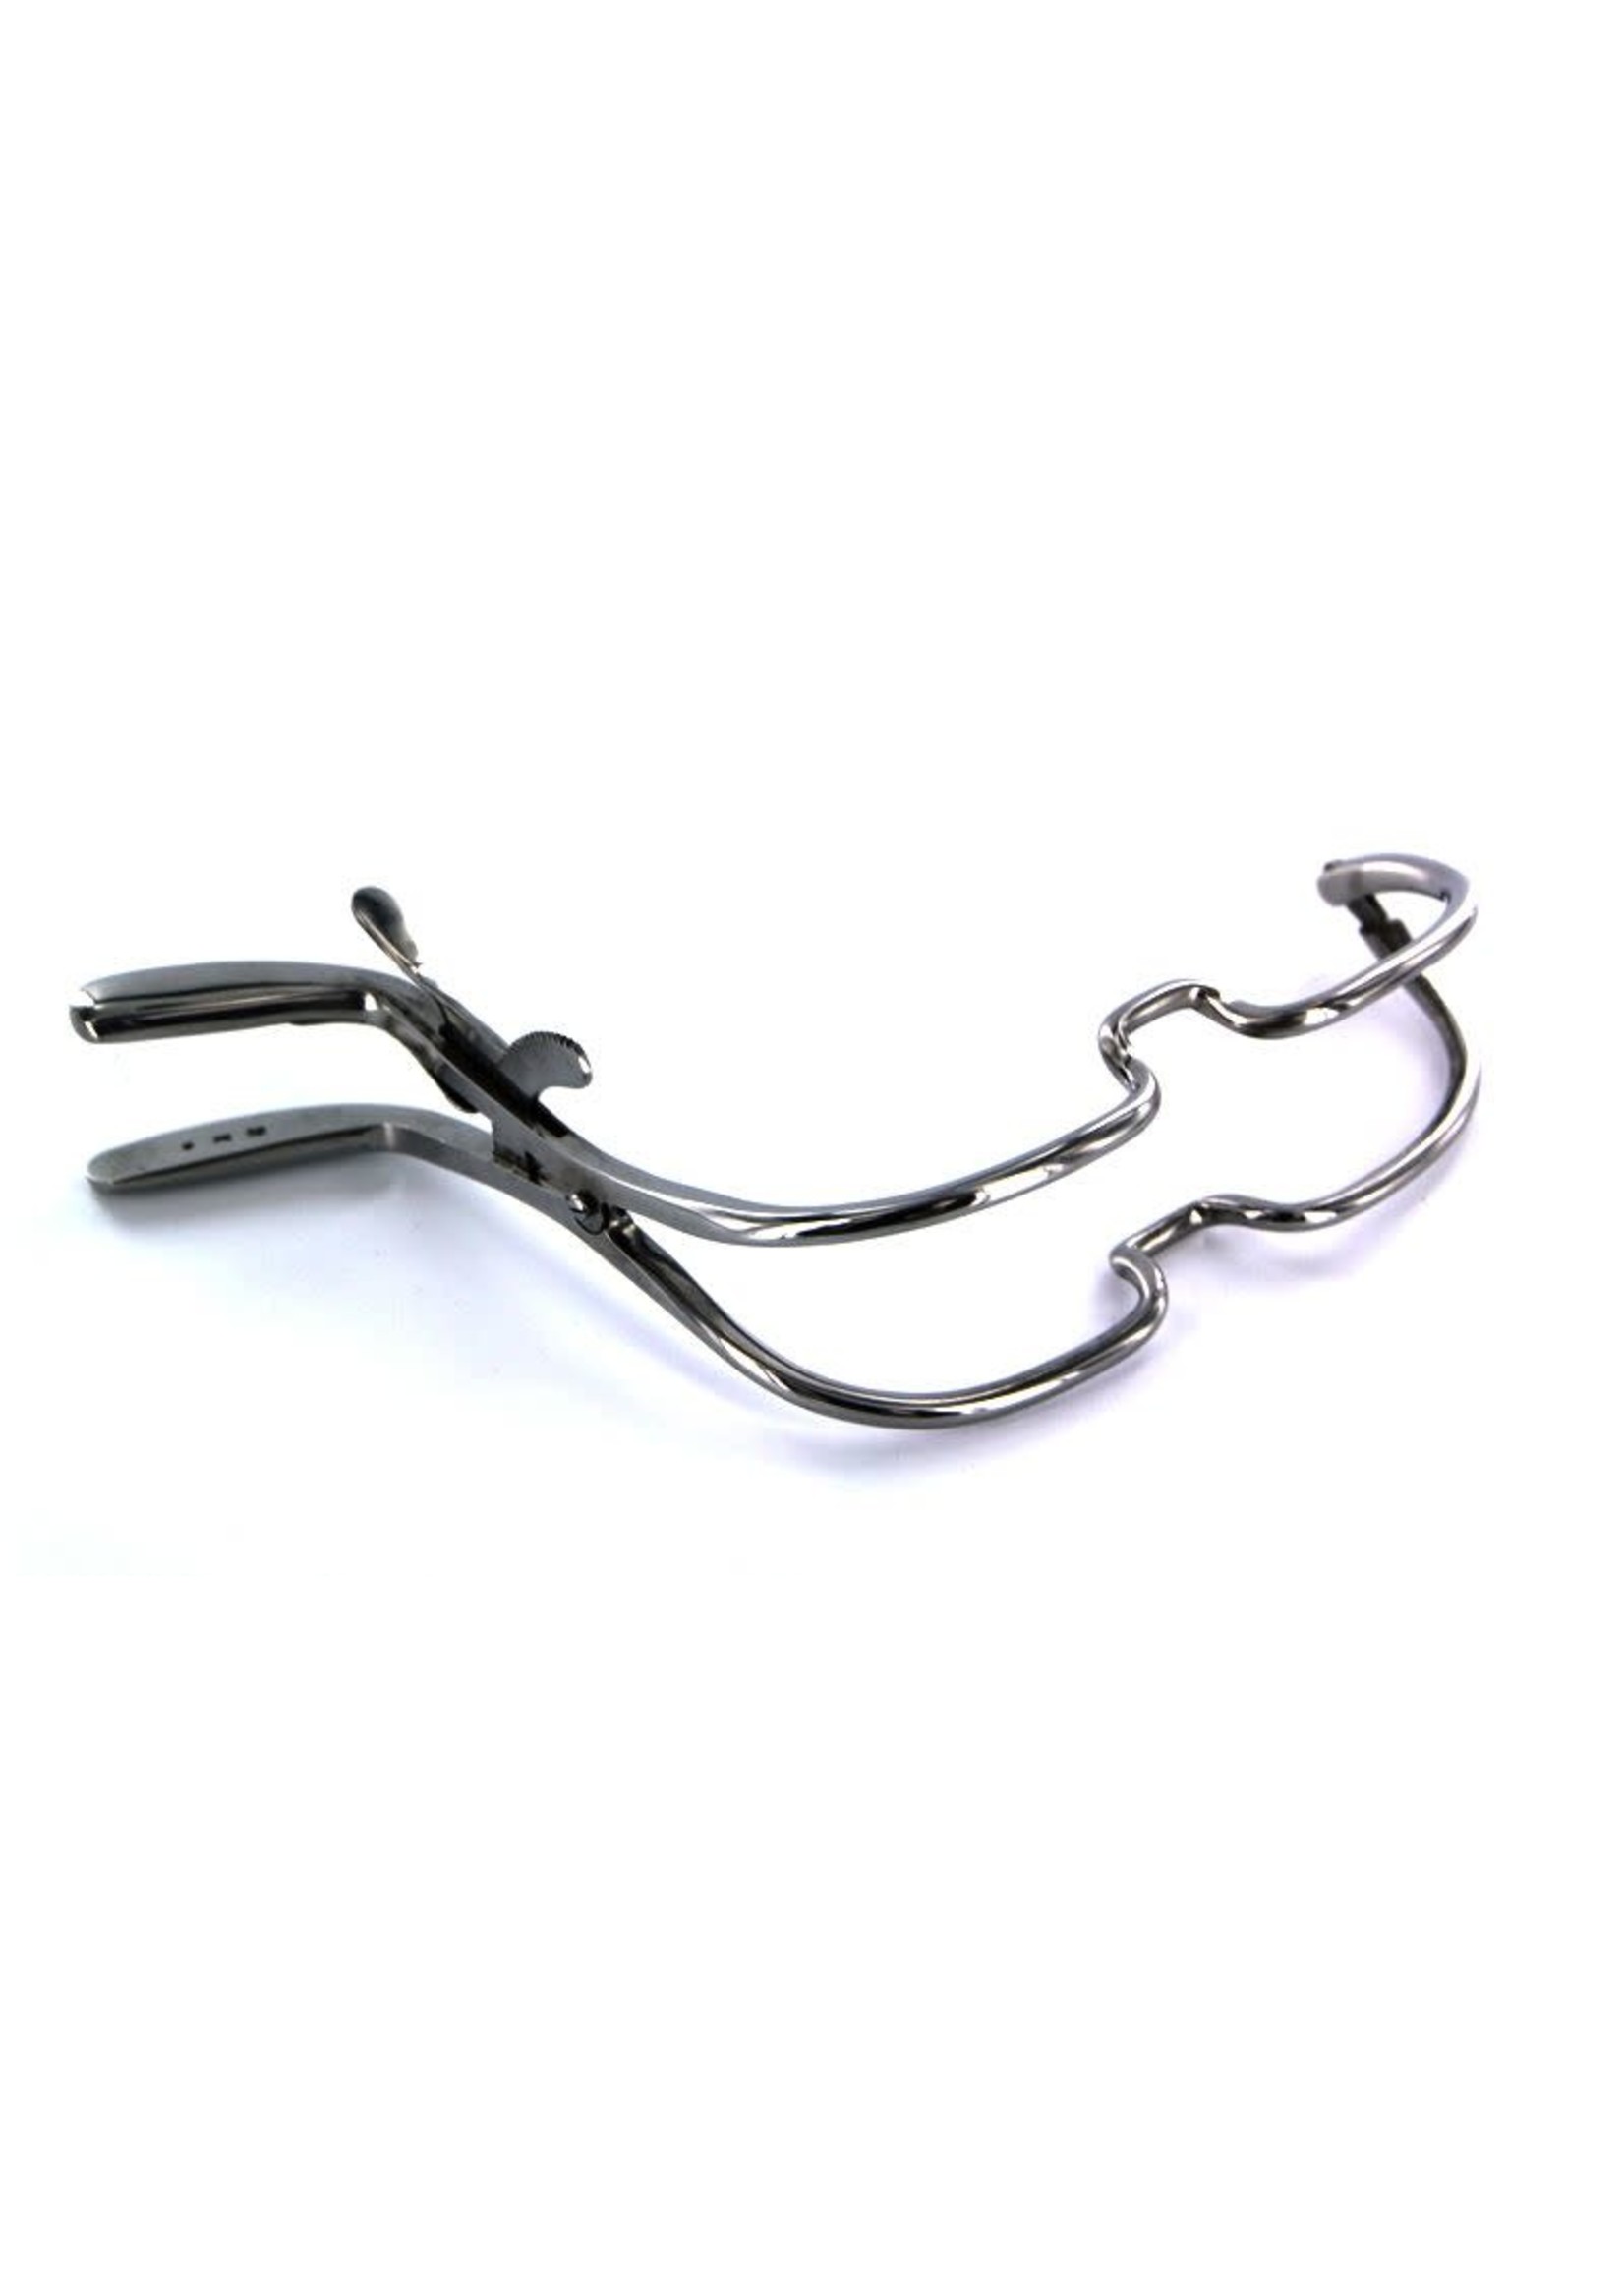 O-Products Stainless mouth gag 5"